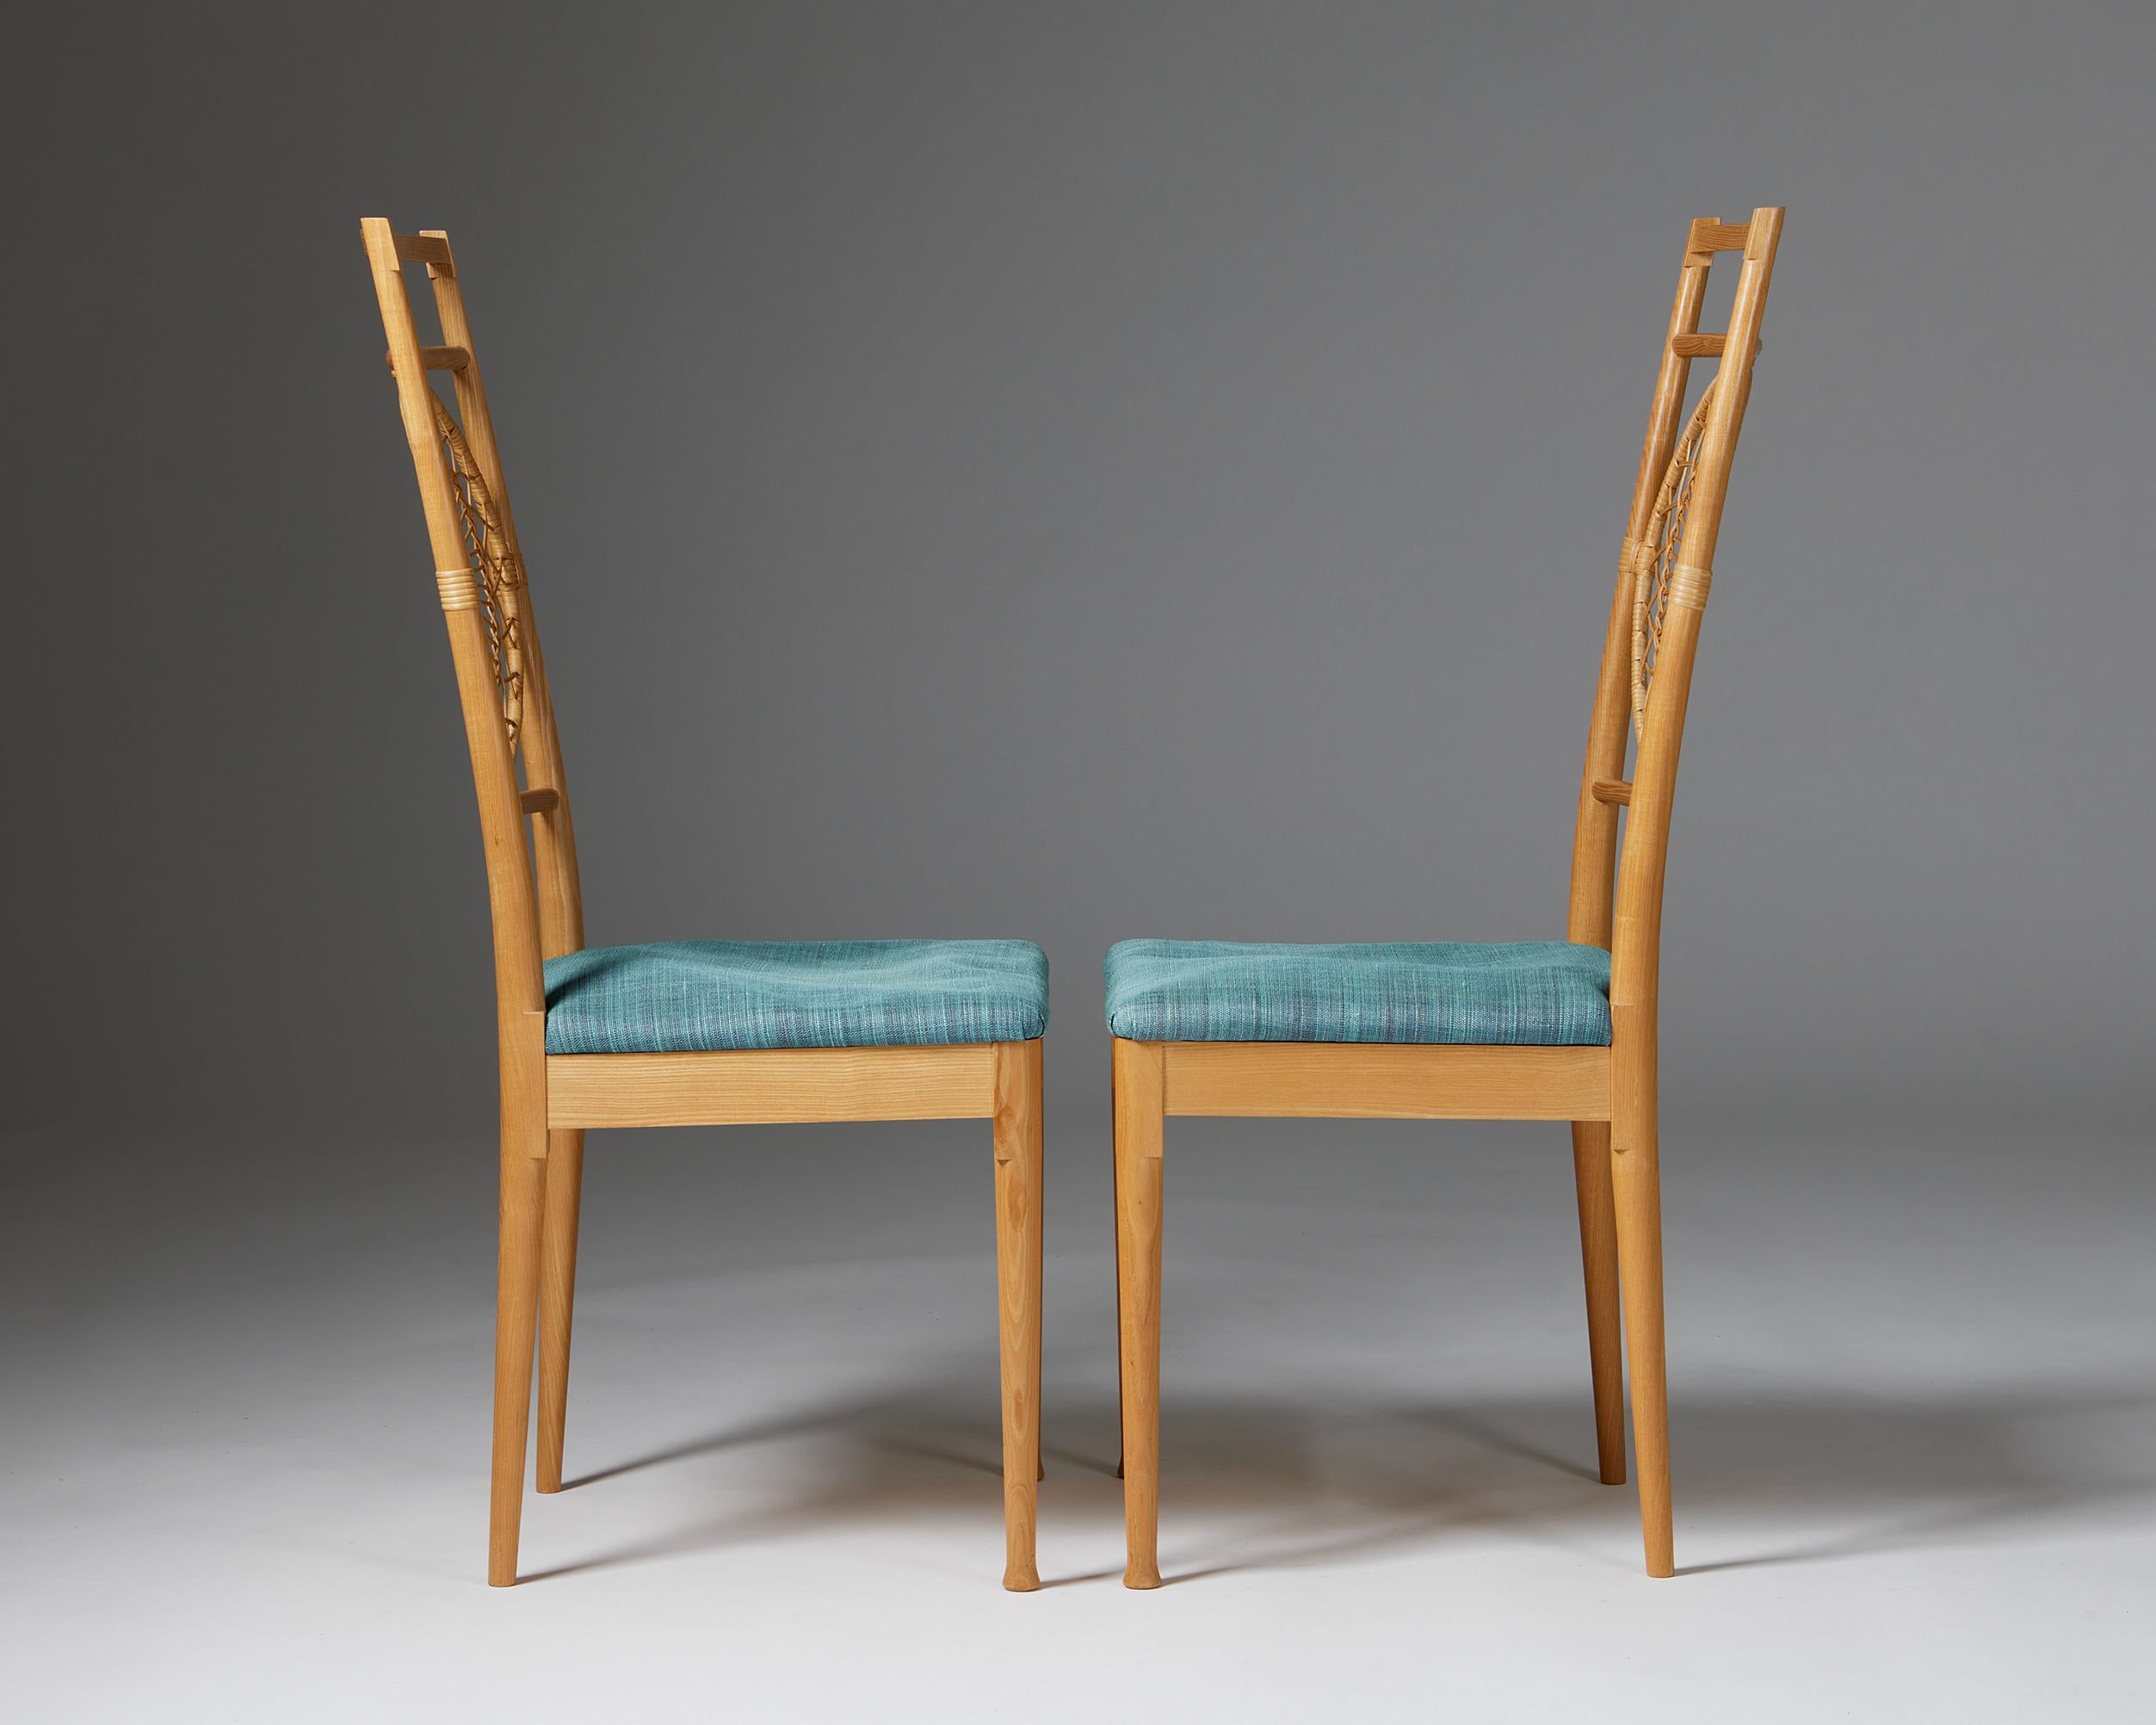 20th Century Pair of chairs designed by Carin Chambert and Sigbritt Larsson